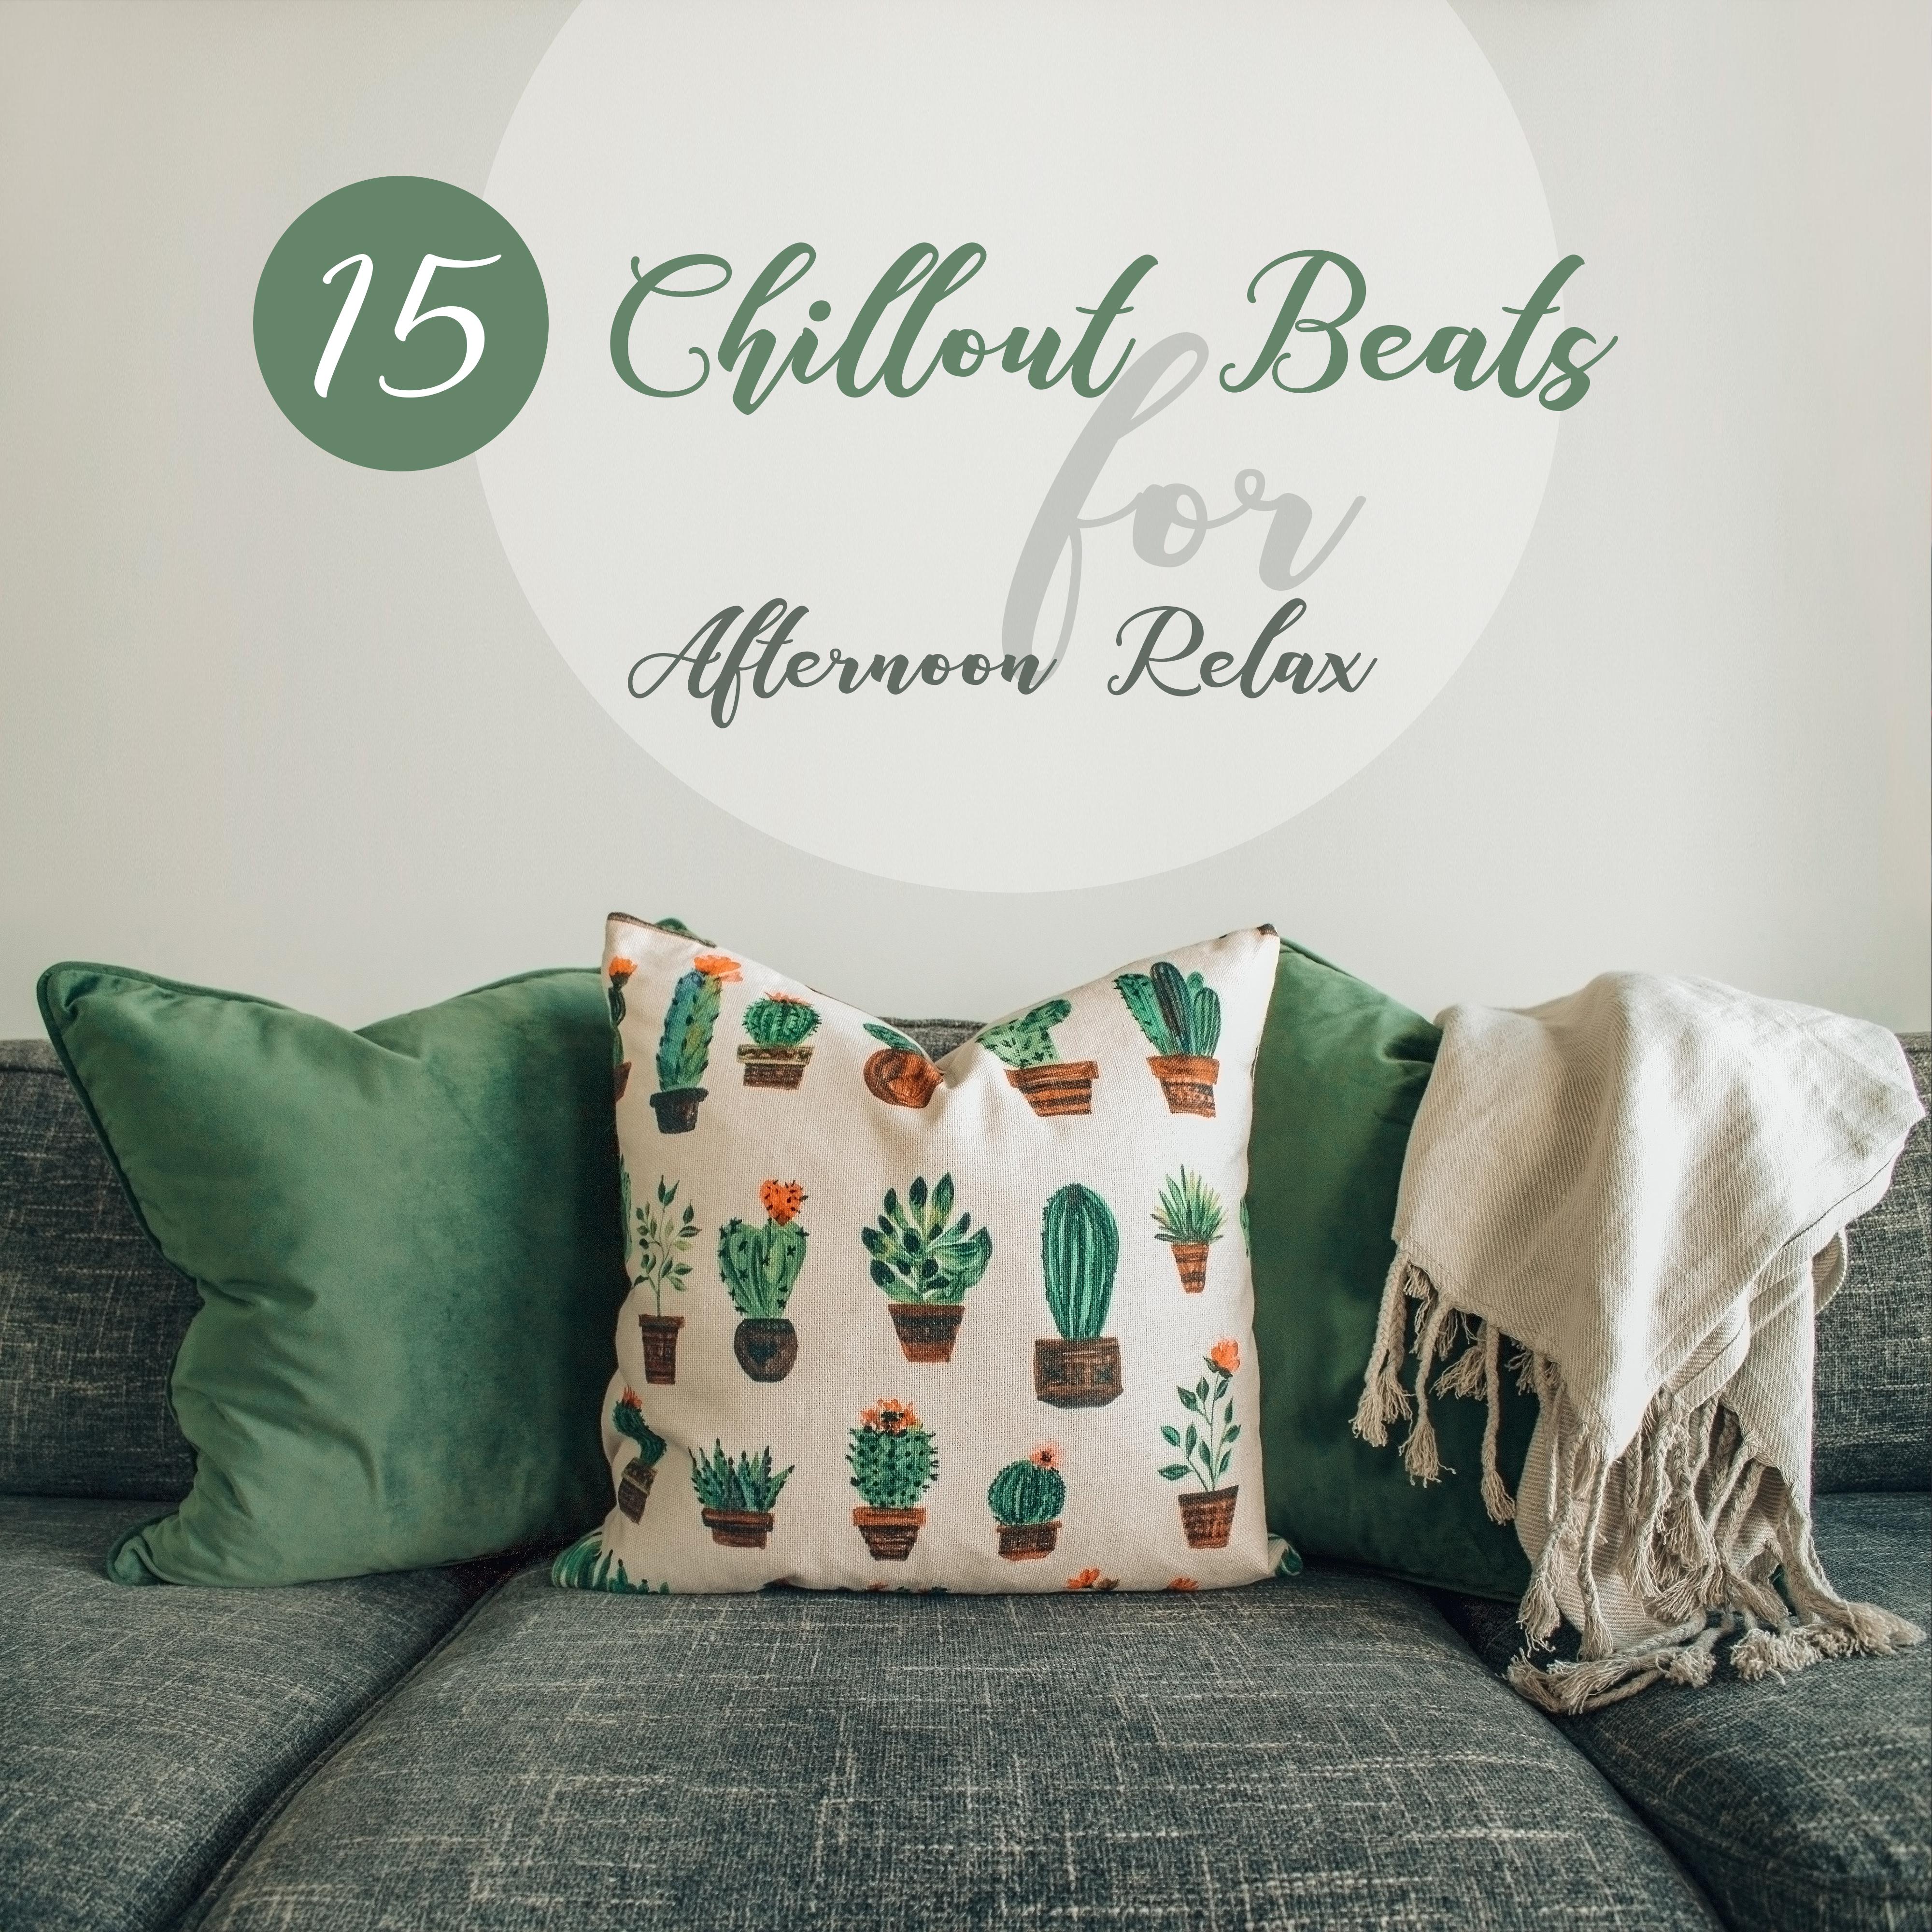 15 Chillout Beats for Afternoon Relax